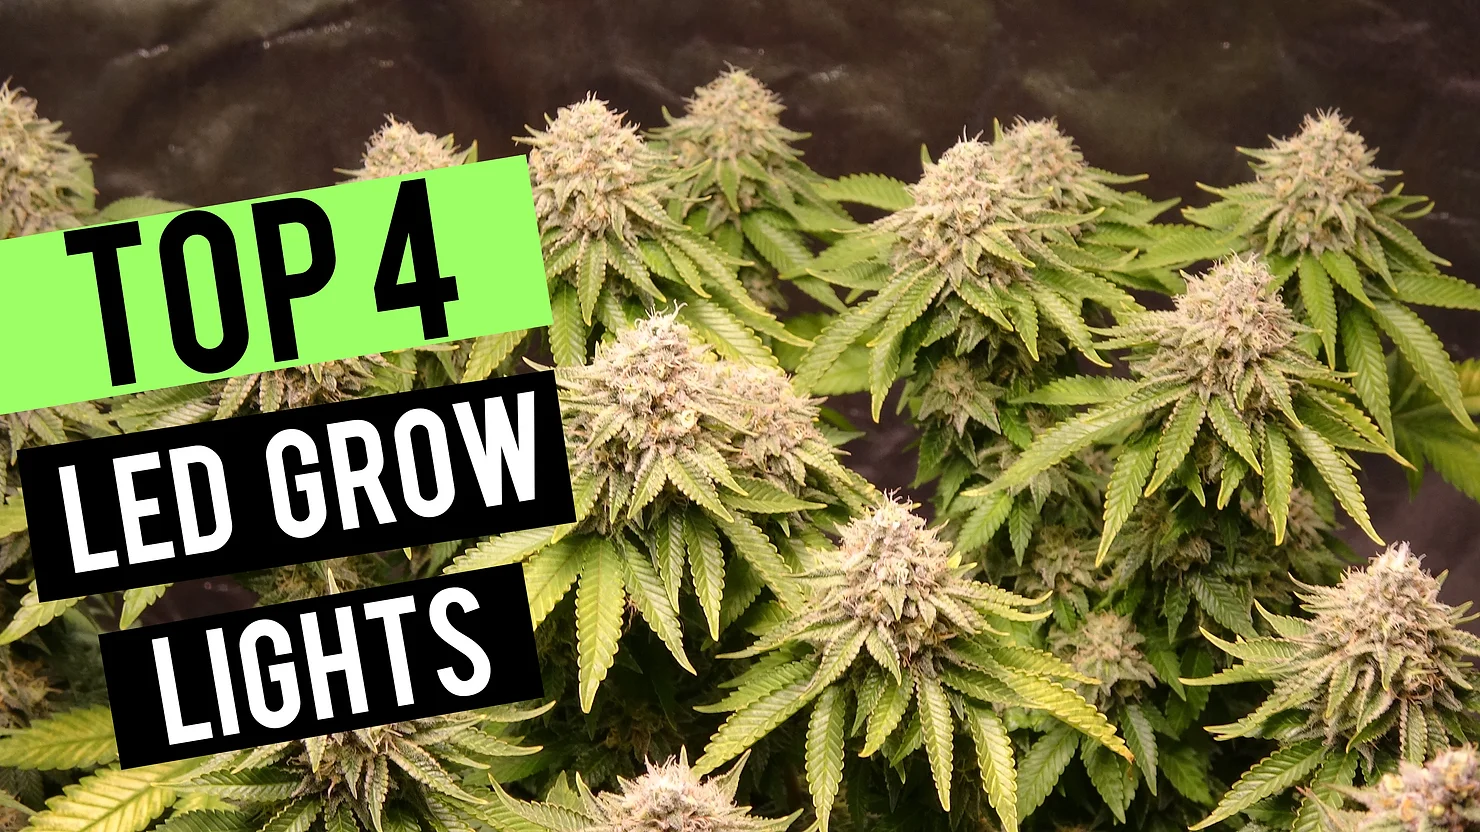 Top 4 LED Grow Lights 2019 | 2×2 Coverage Area